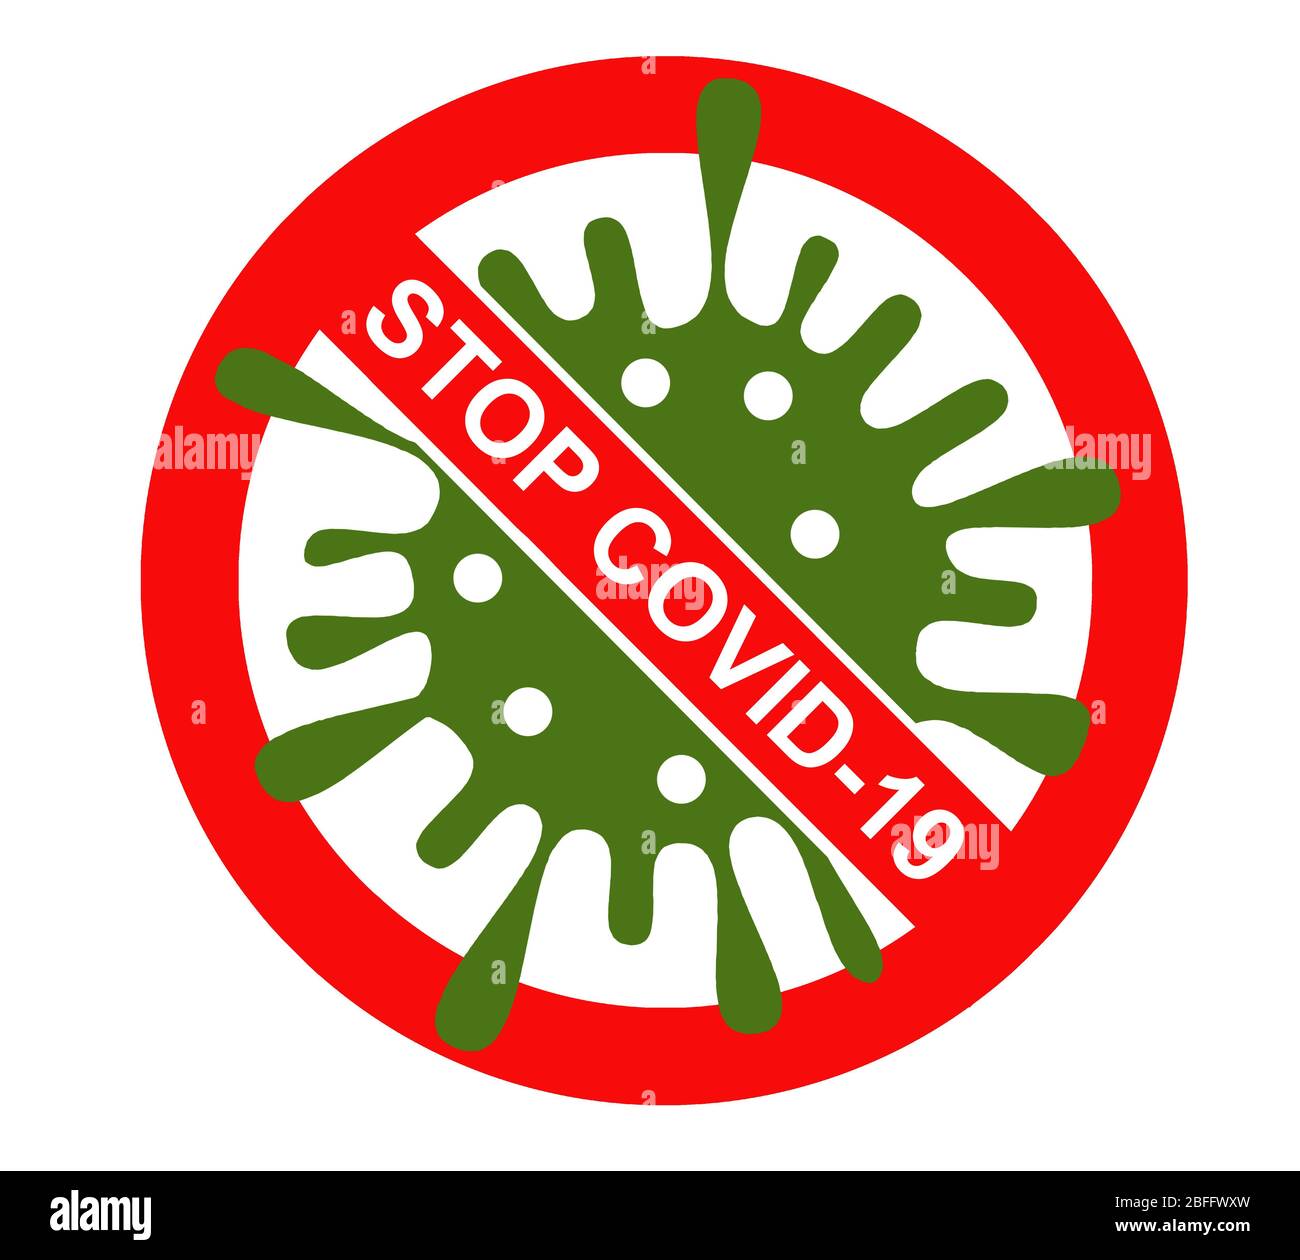 Stop the coronavirus Covid-19. Warning against the spread of the pandemic. Isolated sign on a white background, illustration Stock Photo